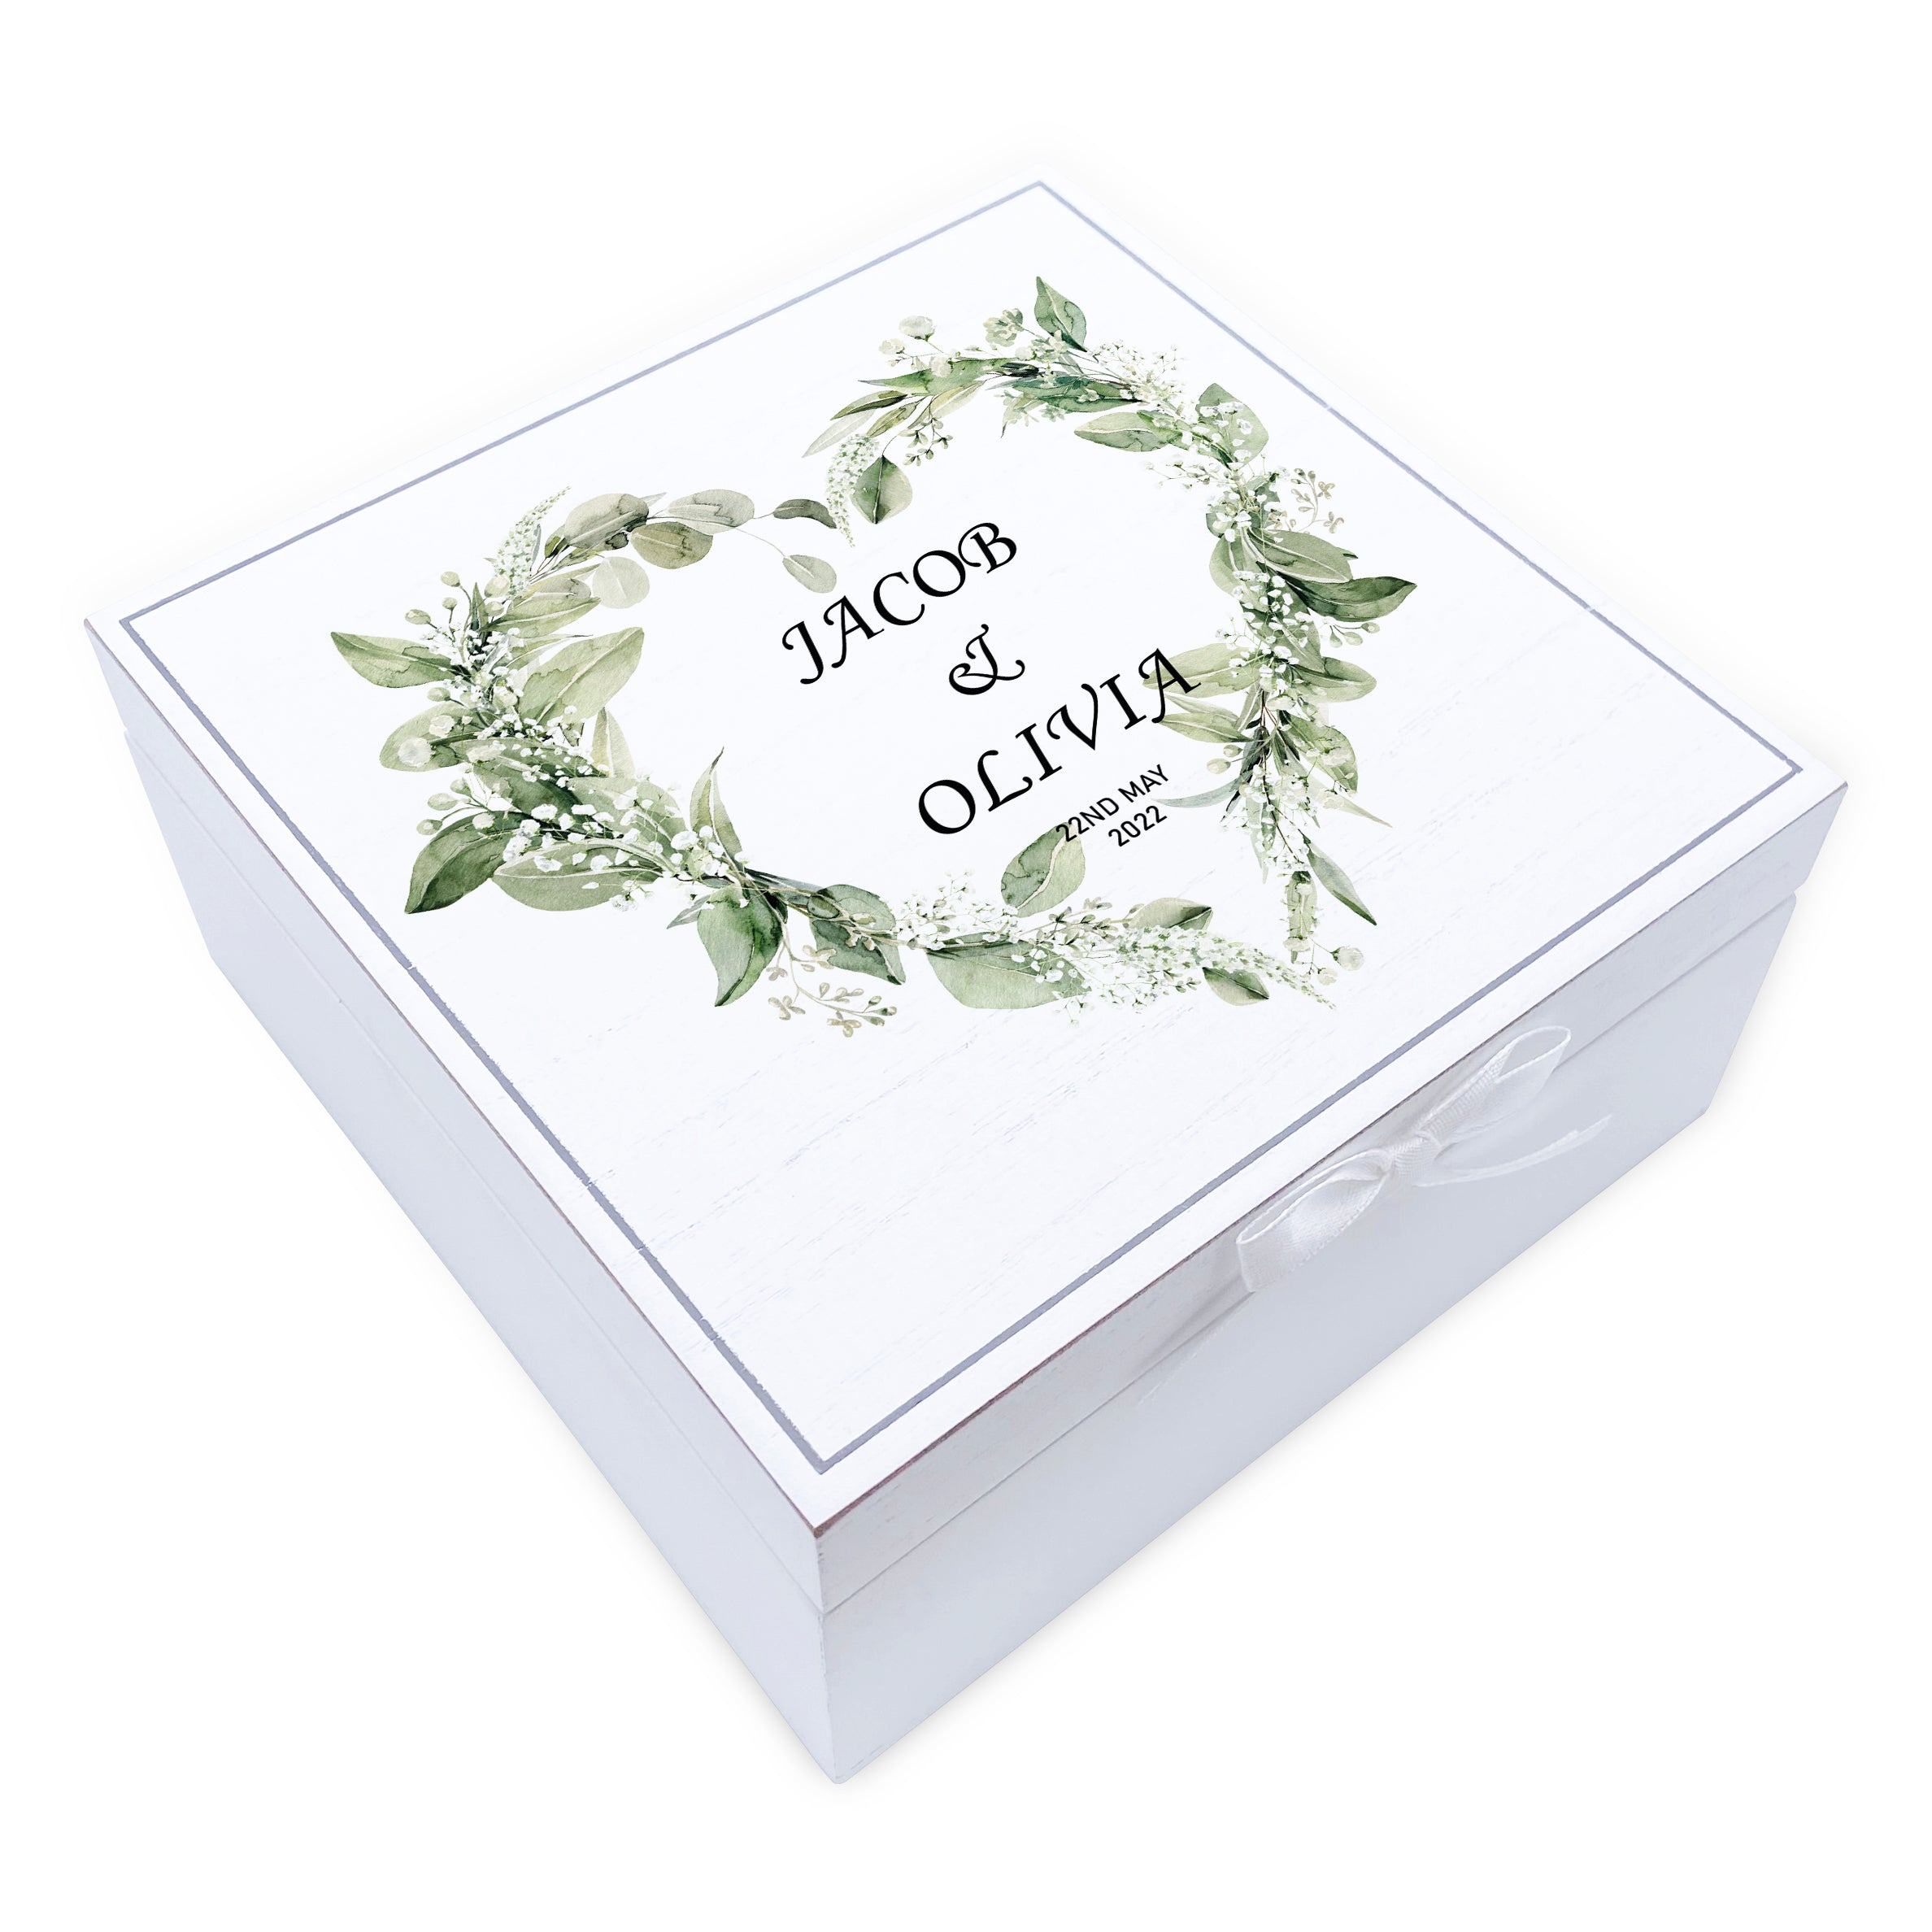 Personalised Wedding Day Vintage Wooden Keepsake Box Gift With Floral Wreath Heart Print